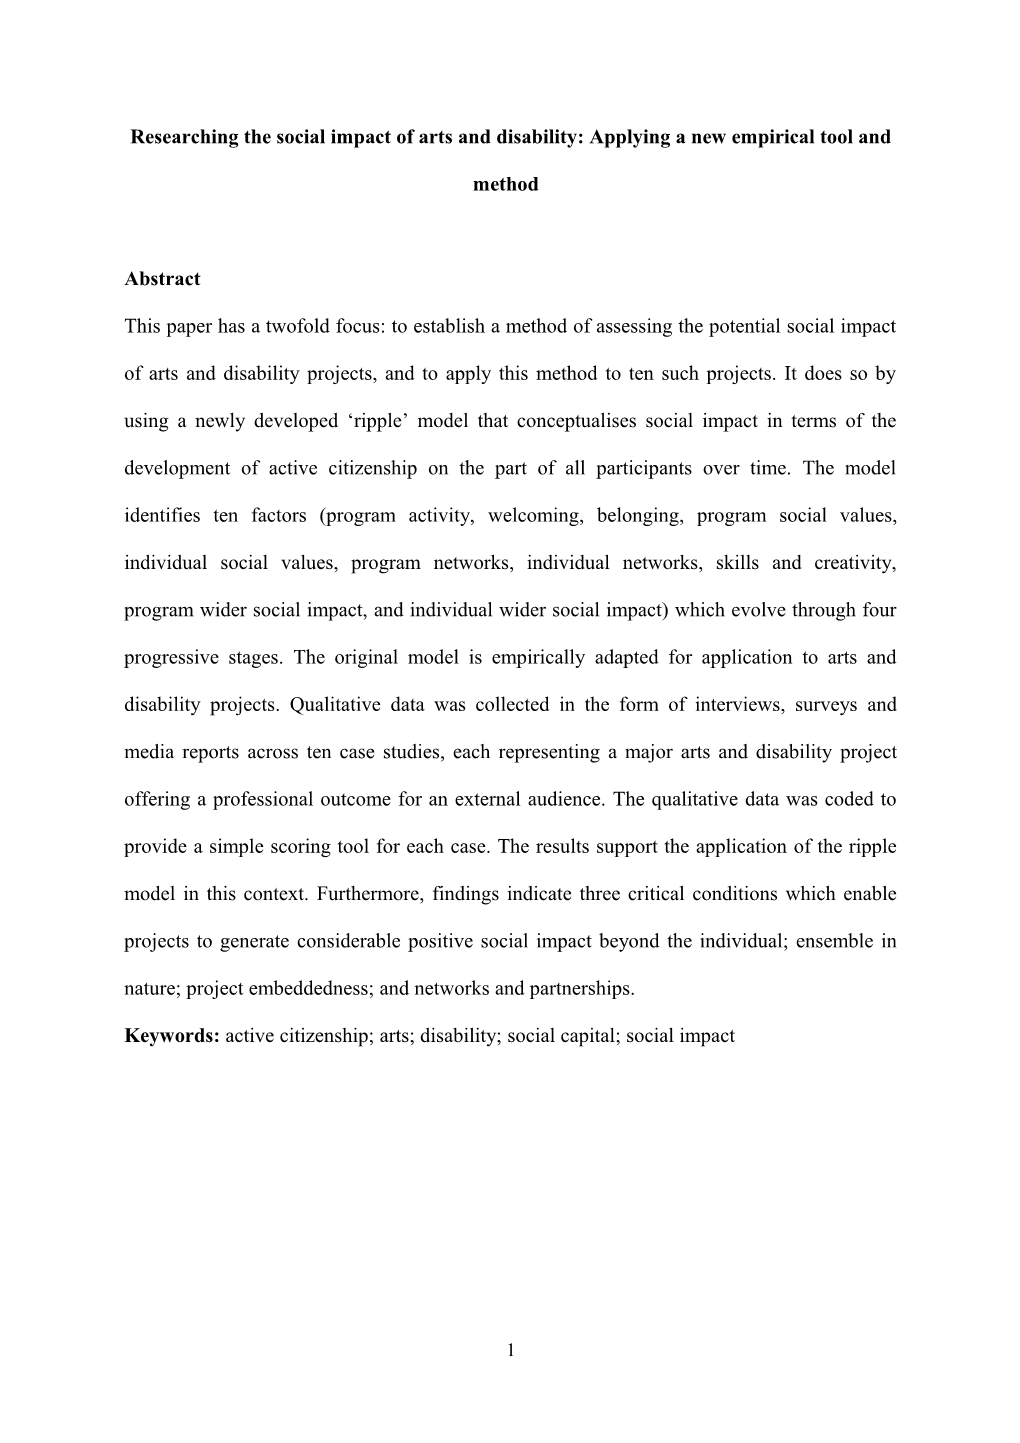 Researching the Social Impact of Arts and Disability: Applying a New Empirical Tool and Method